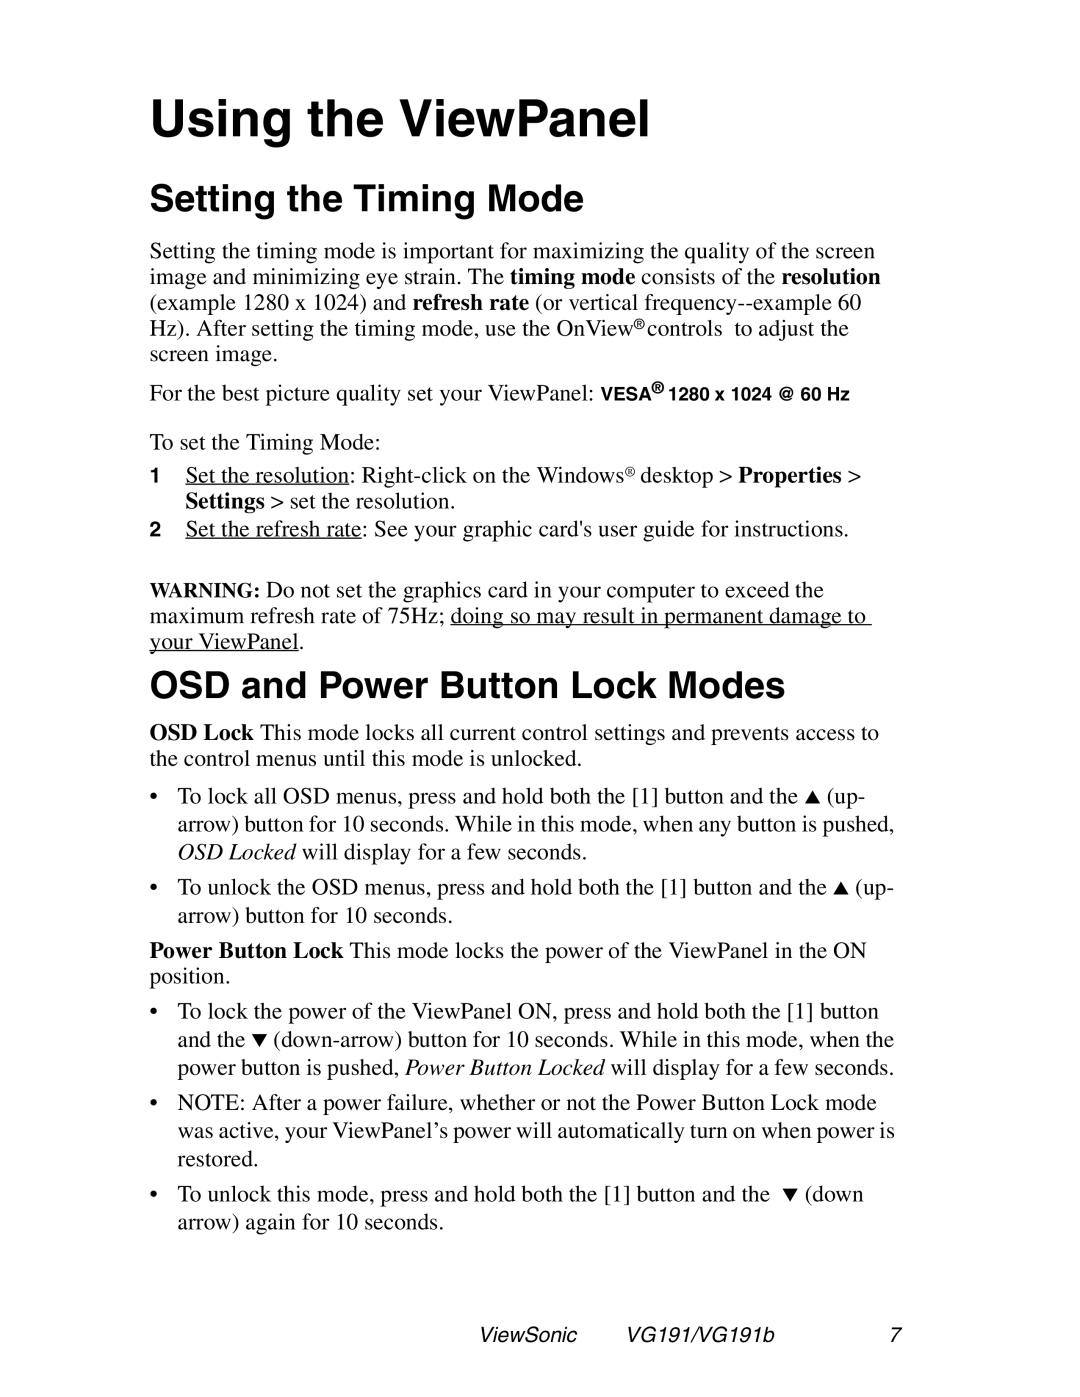 ViewSonic VG191 manual Using the ViewPanel, Setting the Timing Mode, OSD and Power Button Lock Modes 